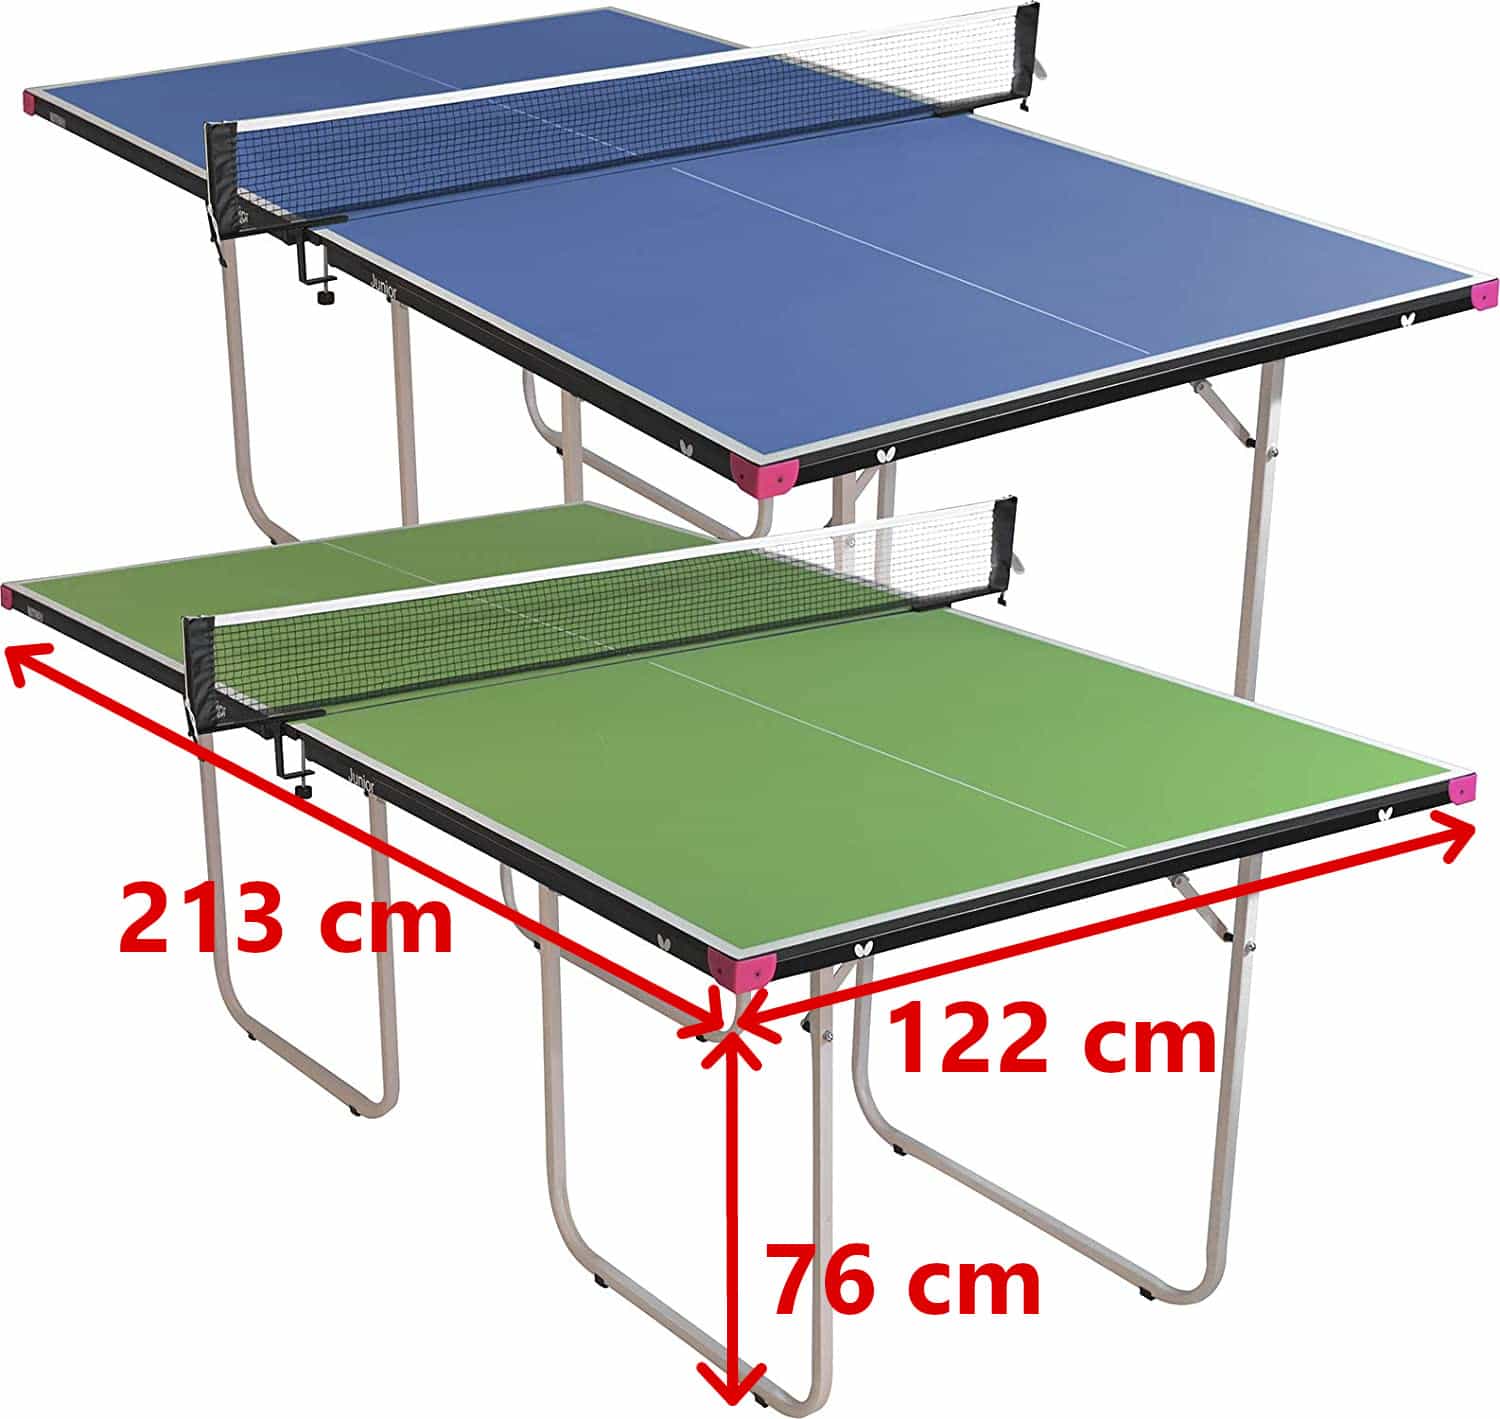 ping pong table dimensions 3/4